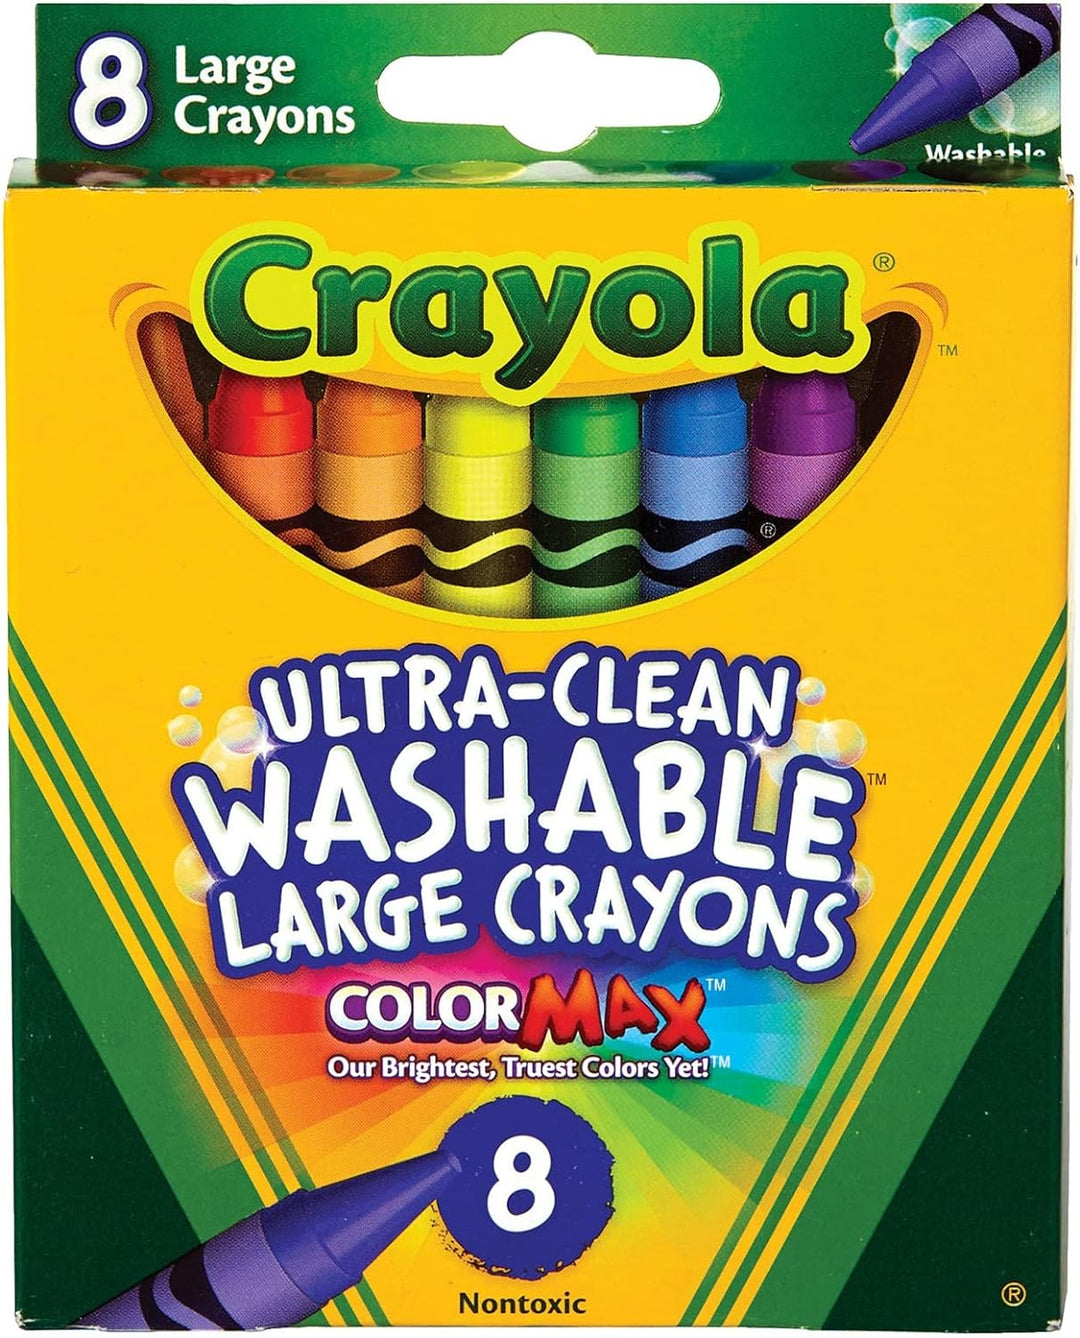 Crayola 8 Ultra Clean Washable Large Crayons